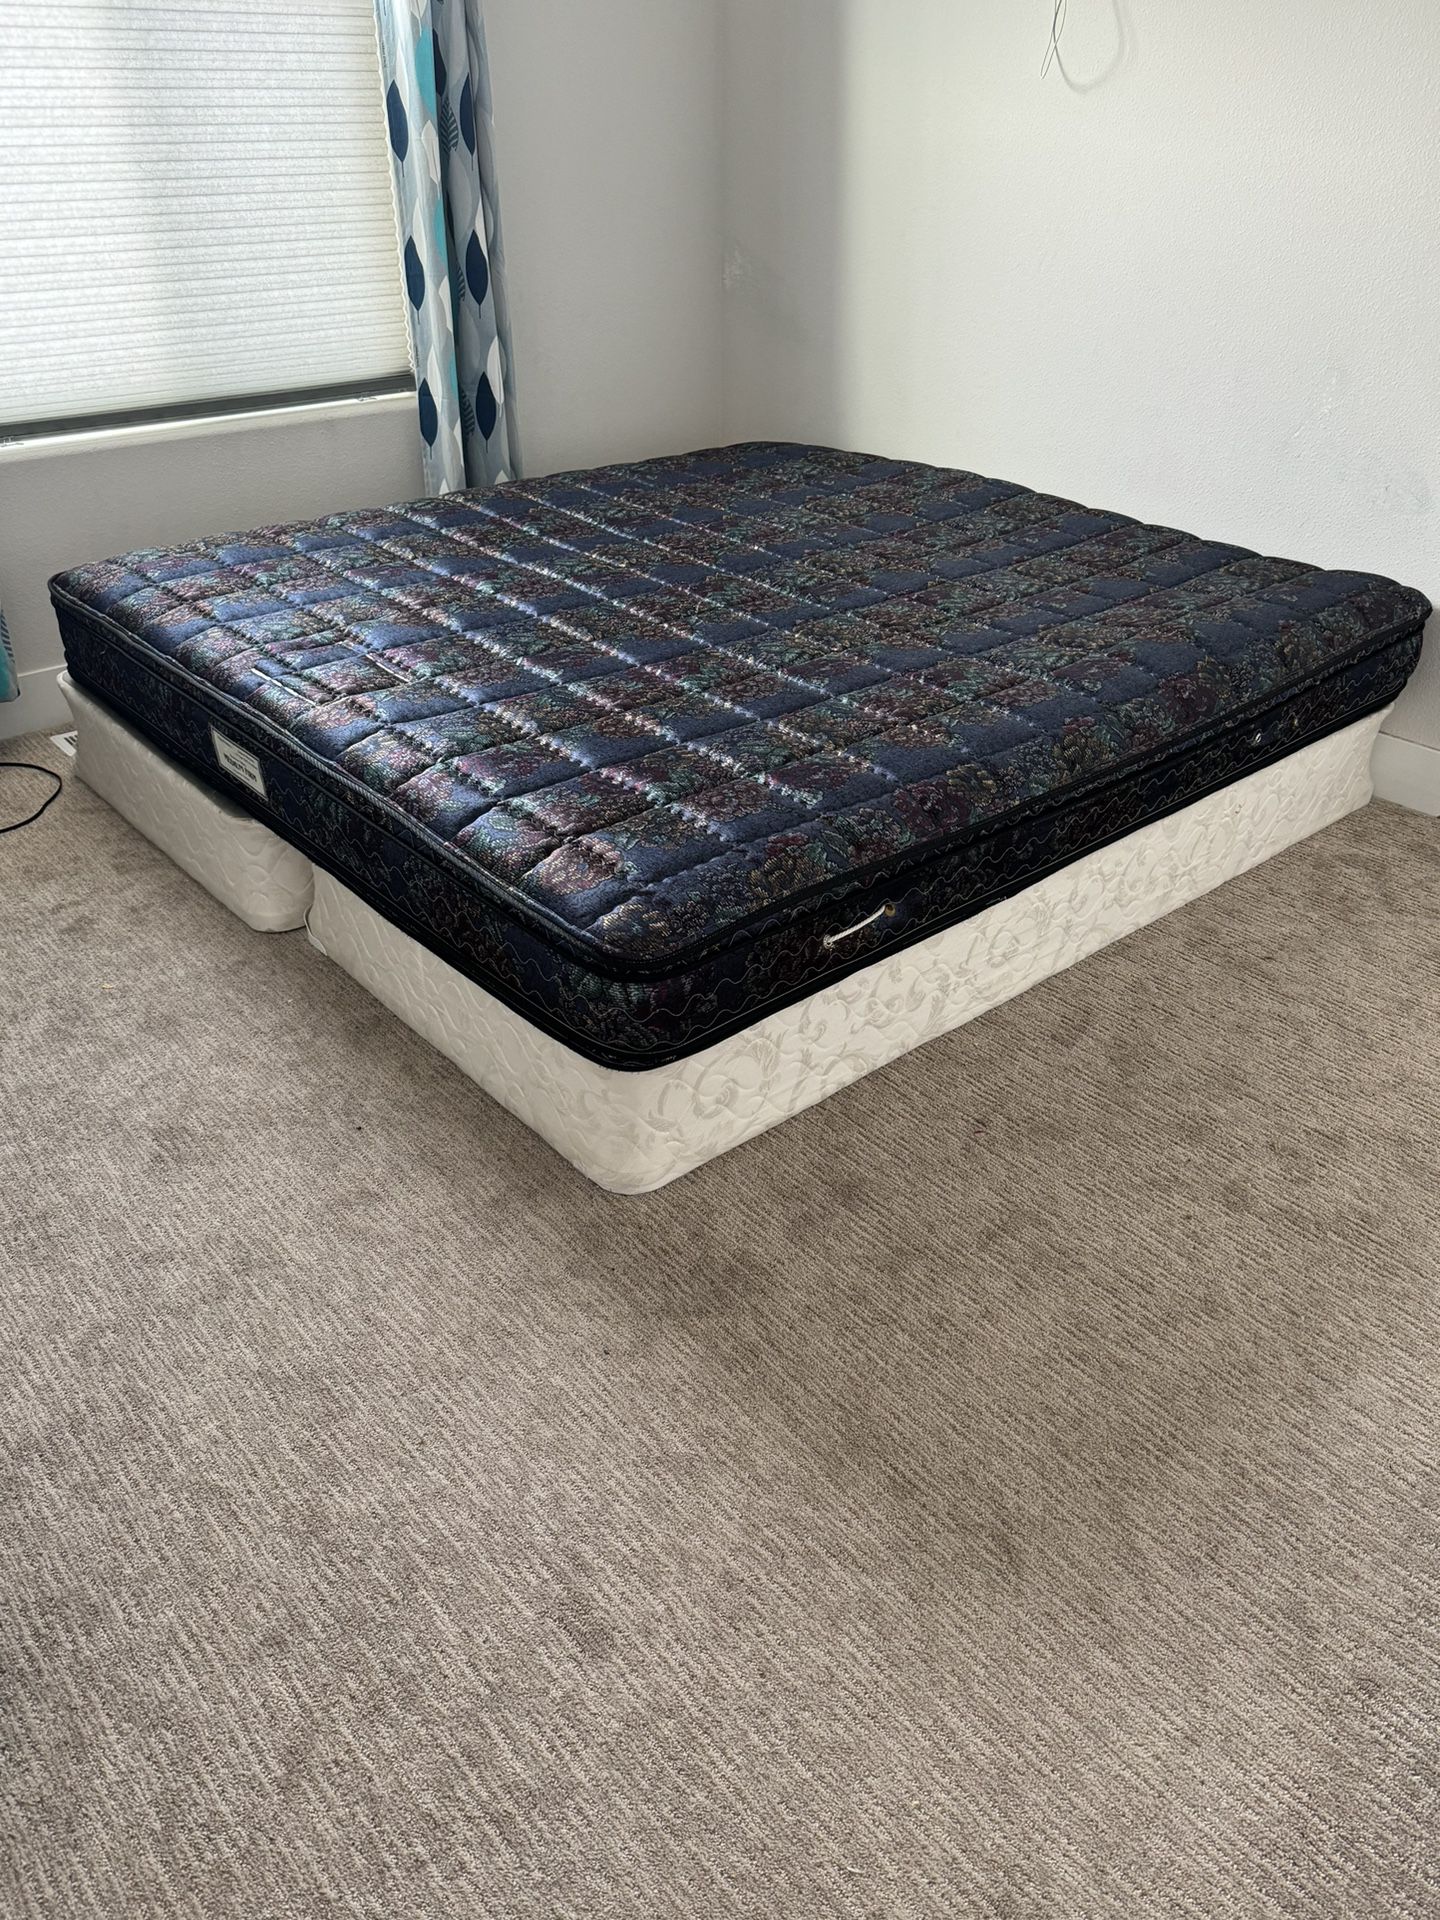 King Size Bed And 2 Box Frames